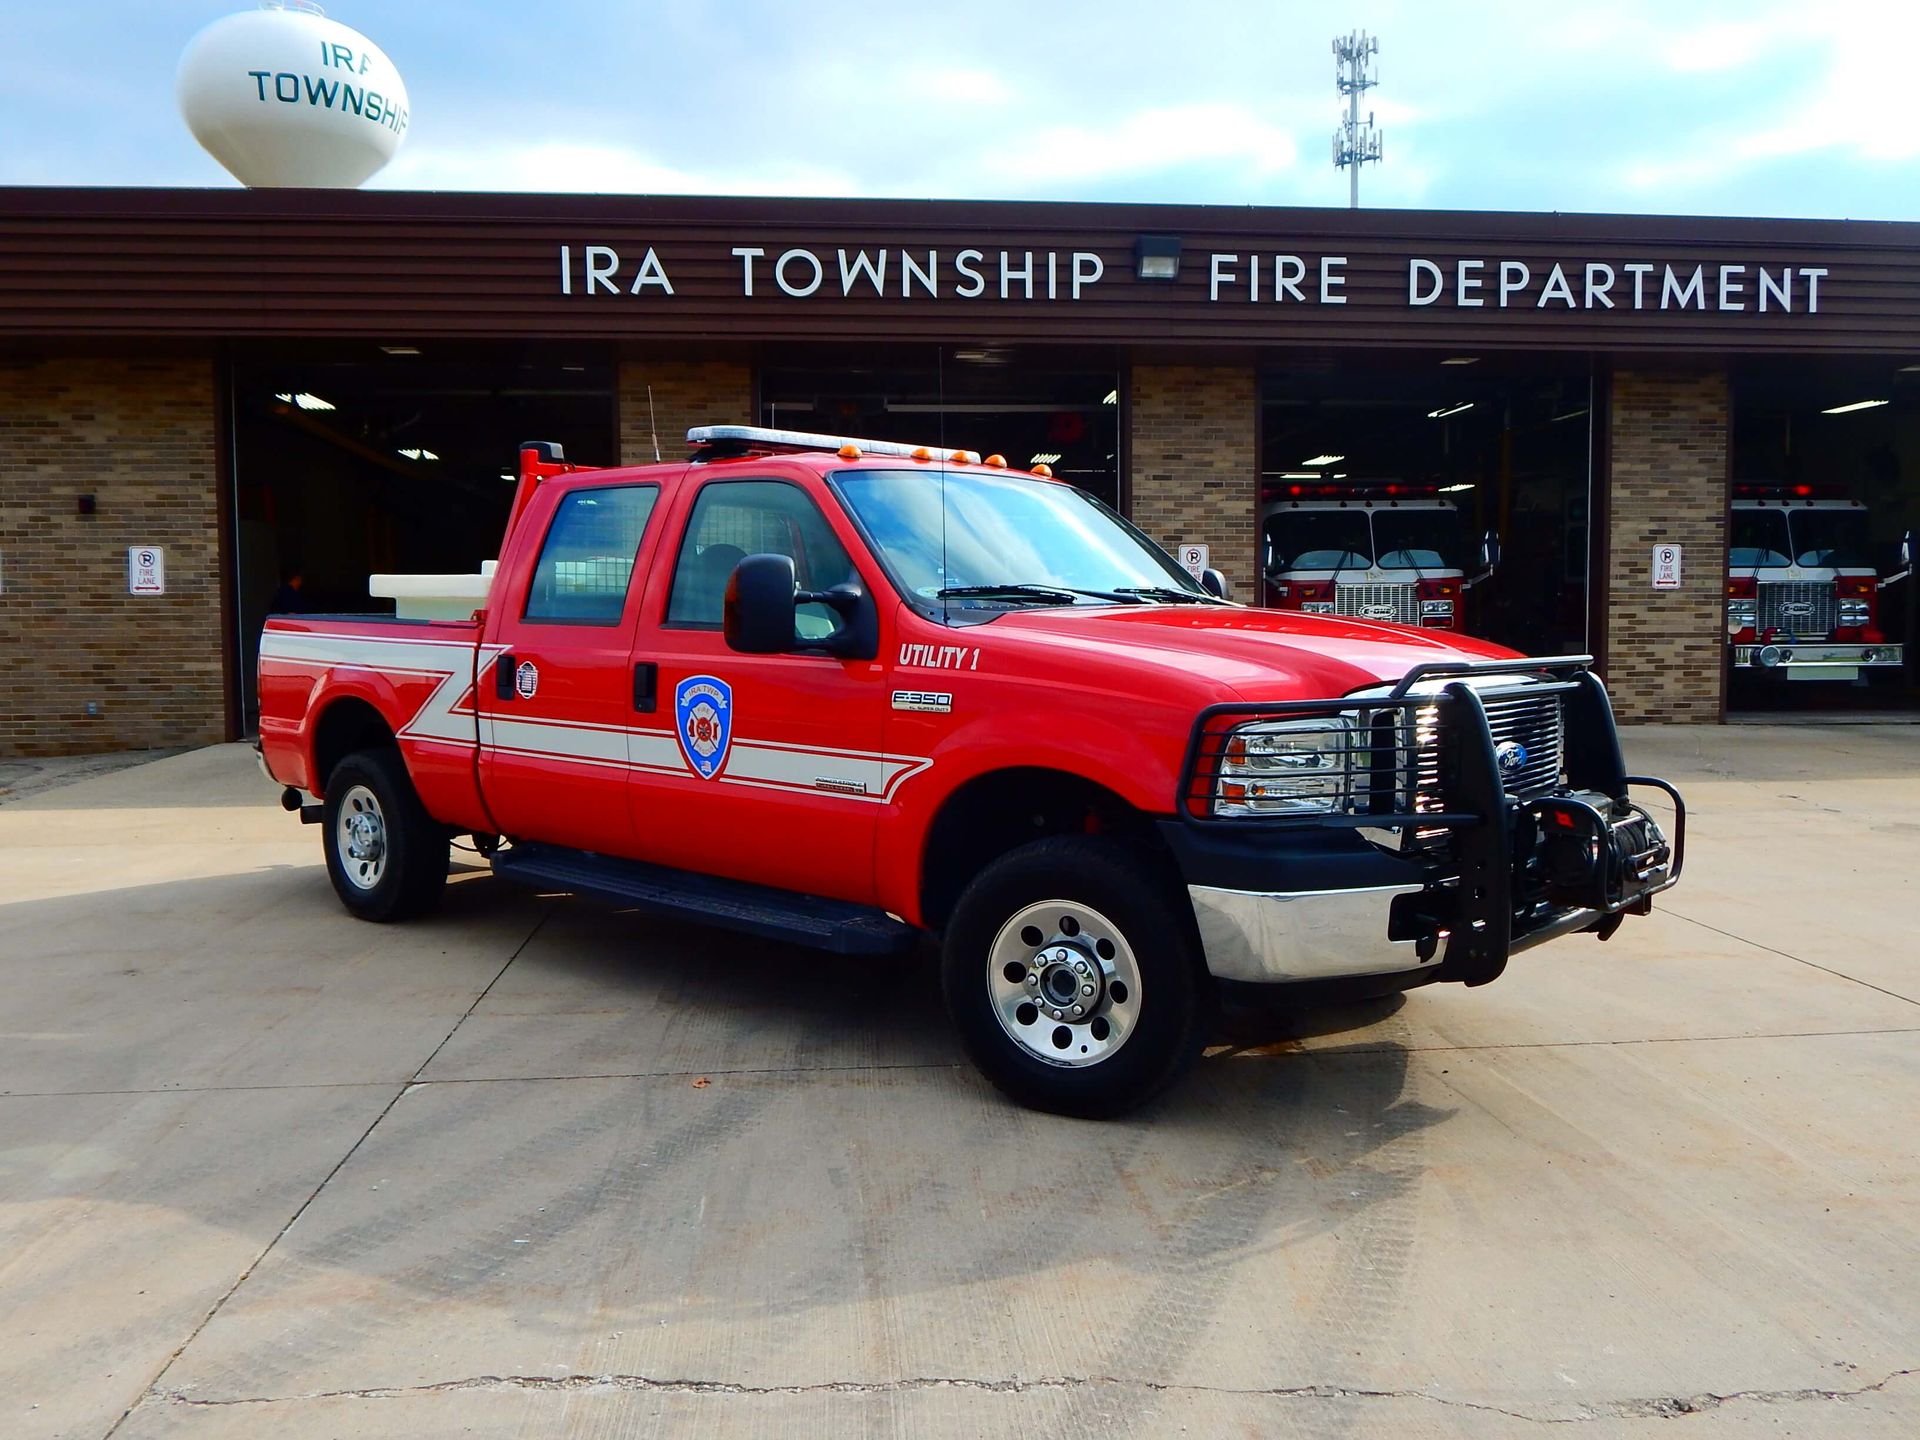 A red truck is parked in front of a building that says Ira Township Fire Department.